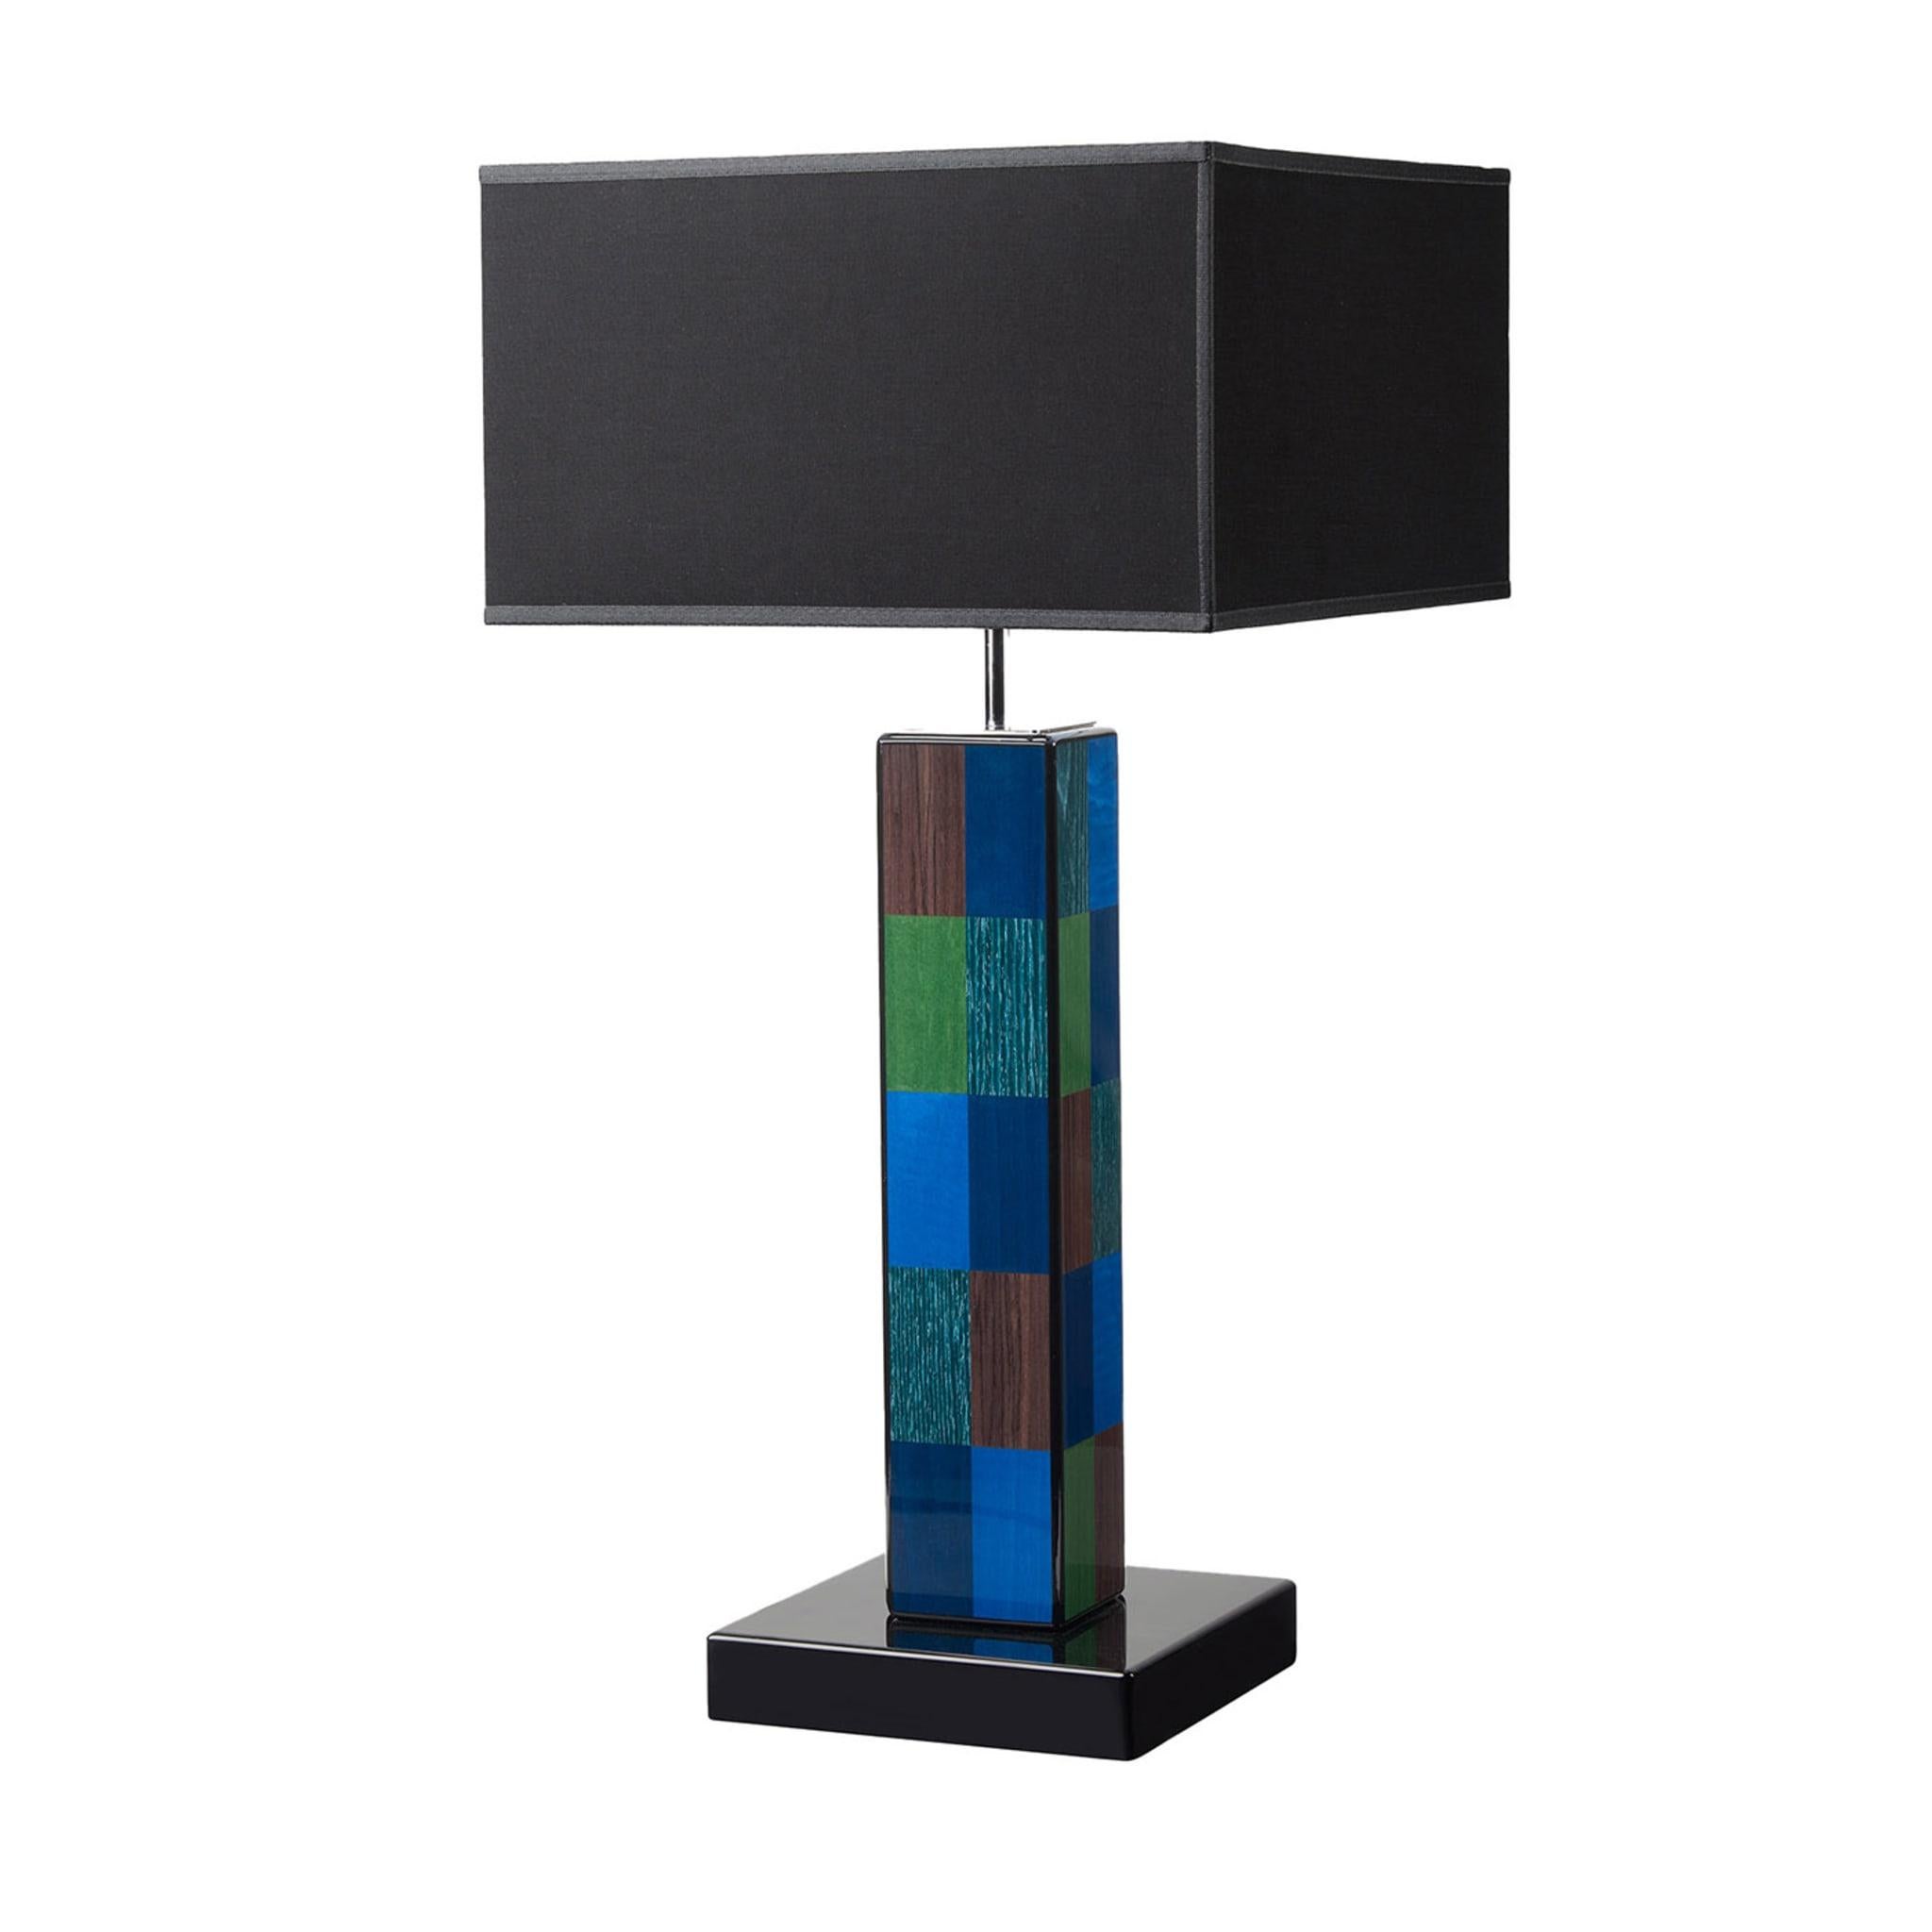 Part of the Venezia Cannaregio series of designs inspired by the namesake historic sestiere of Venice, this table lamp will make for a timeless addition to a contemporary-style interior. Boasting a handmade inlay work painted by hand in a vivacious,